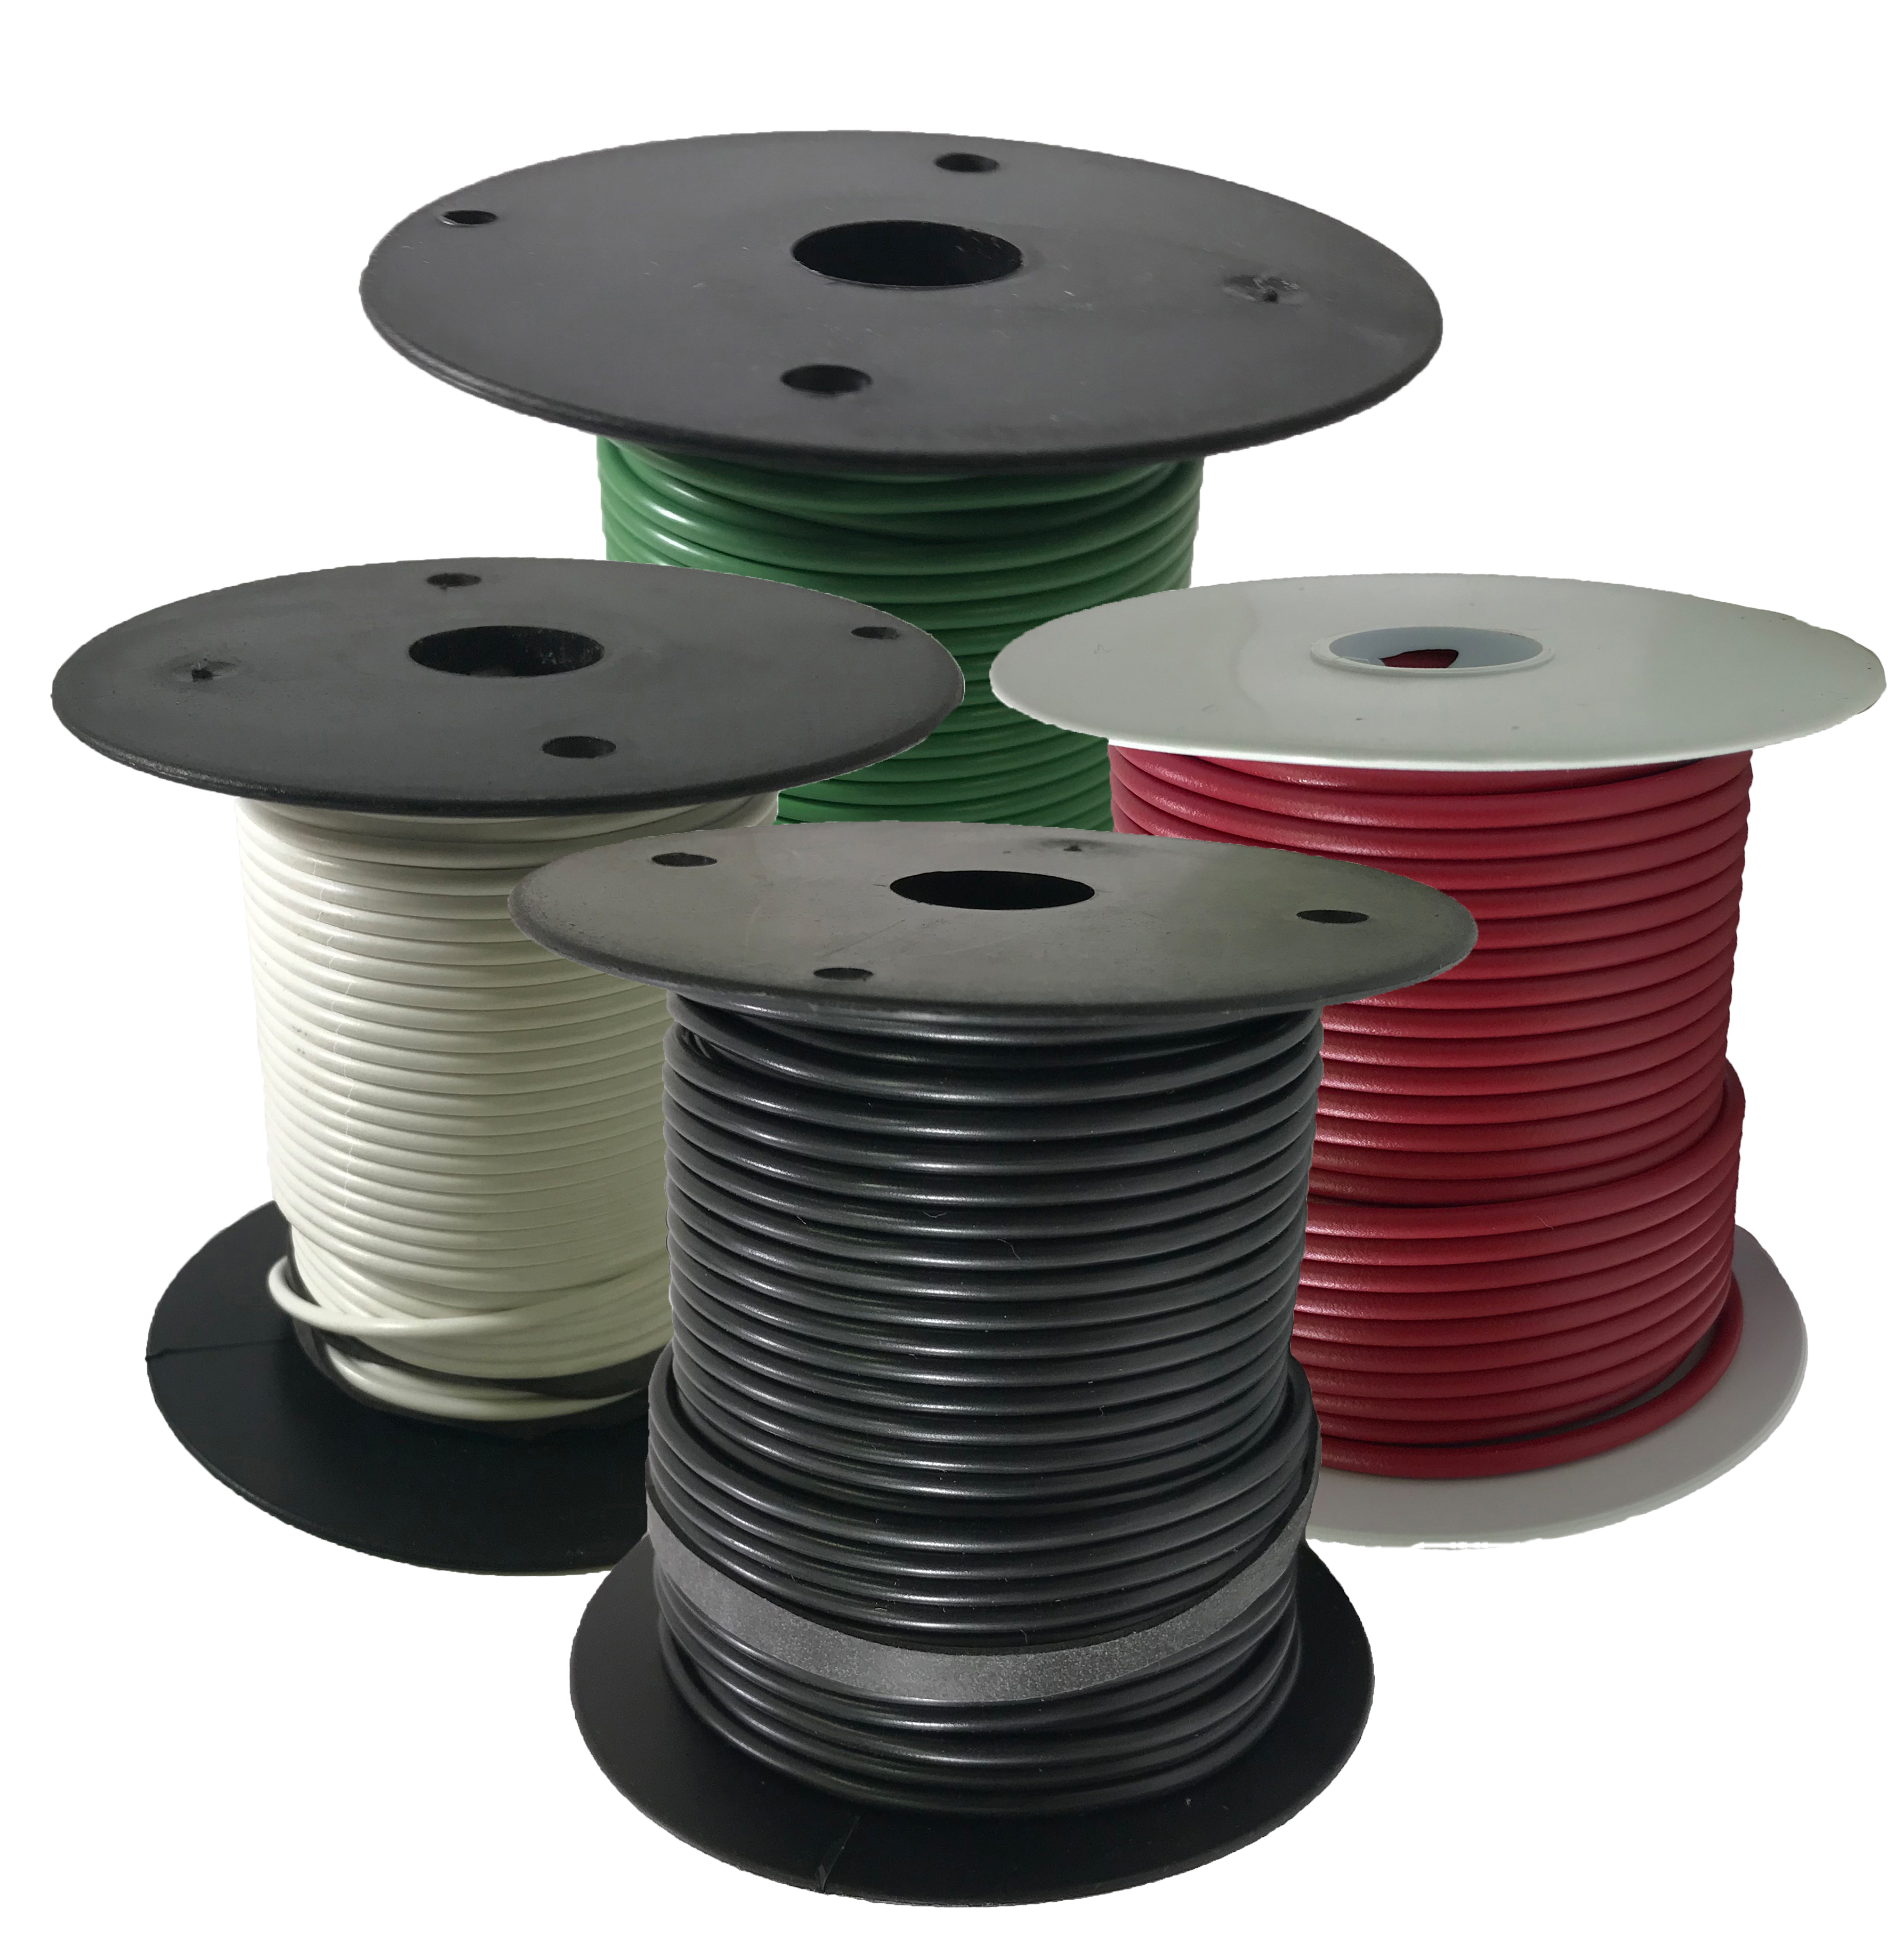 100 FEET AUTOMOTIVE PRIMARY WIRE 14 A GAUGE AWG HIGH TEMP GXL 10 COLORS 10 FT EA 